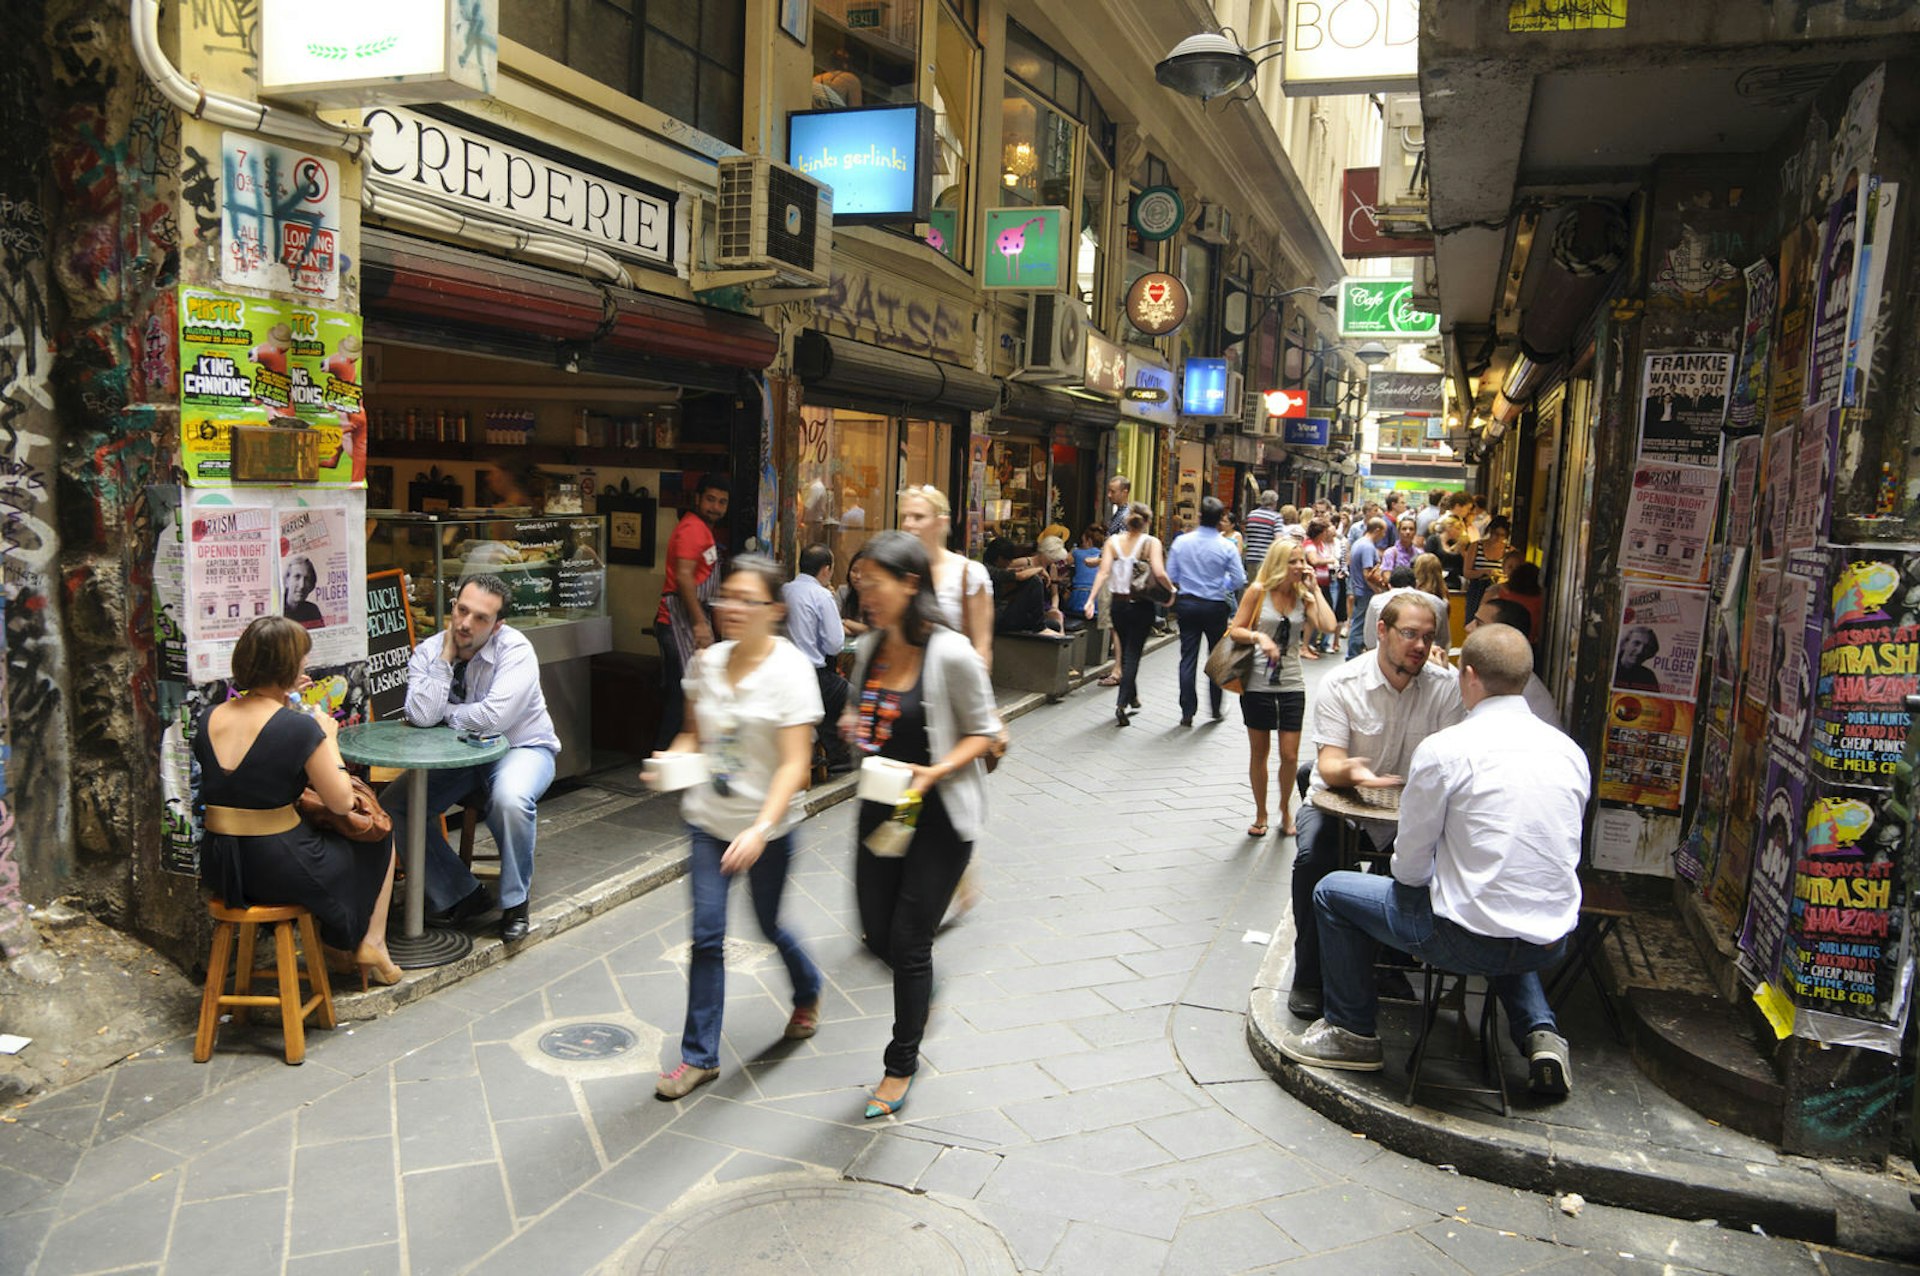 A busy cobbled stone street in Centre Place in Melbourne filled with people walking or sitting outside a shop